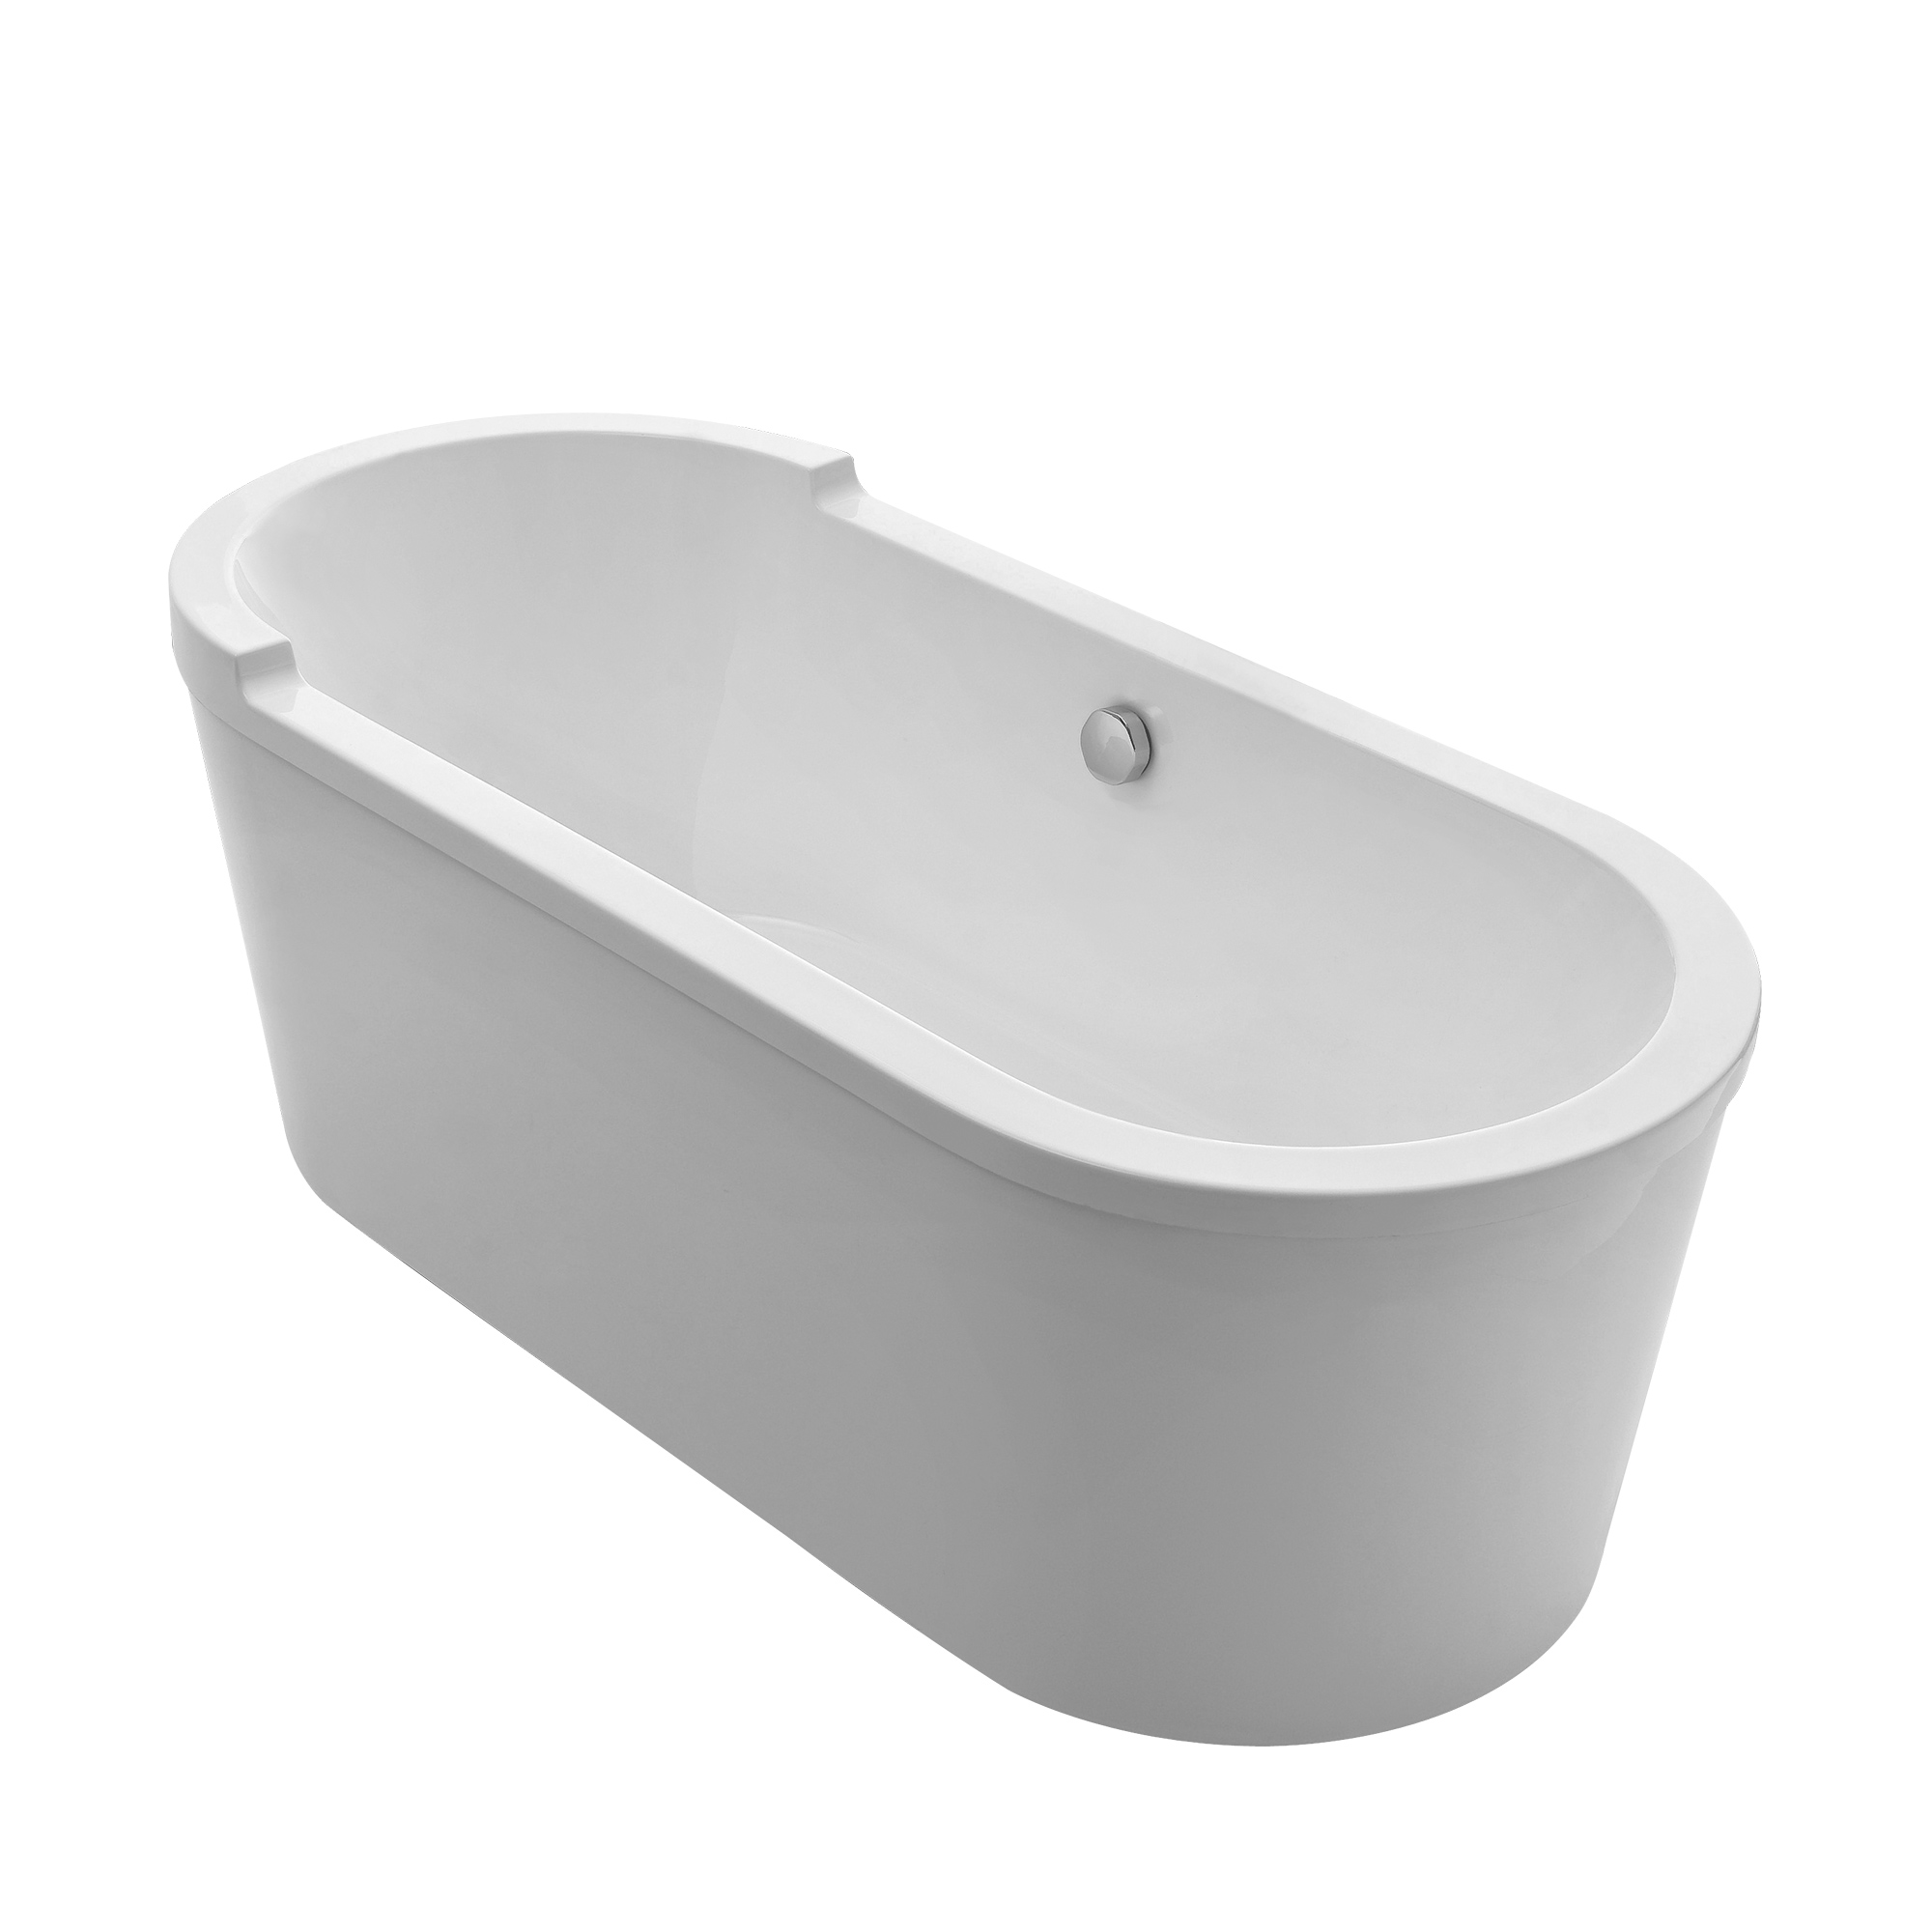 Bathhaus Oval Double Ended Single Sided Armrest Freestanding Lucite Acrylic Bathtub with a Chrome Mechanical Pop-up Waste and a